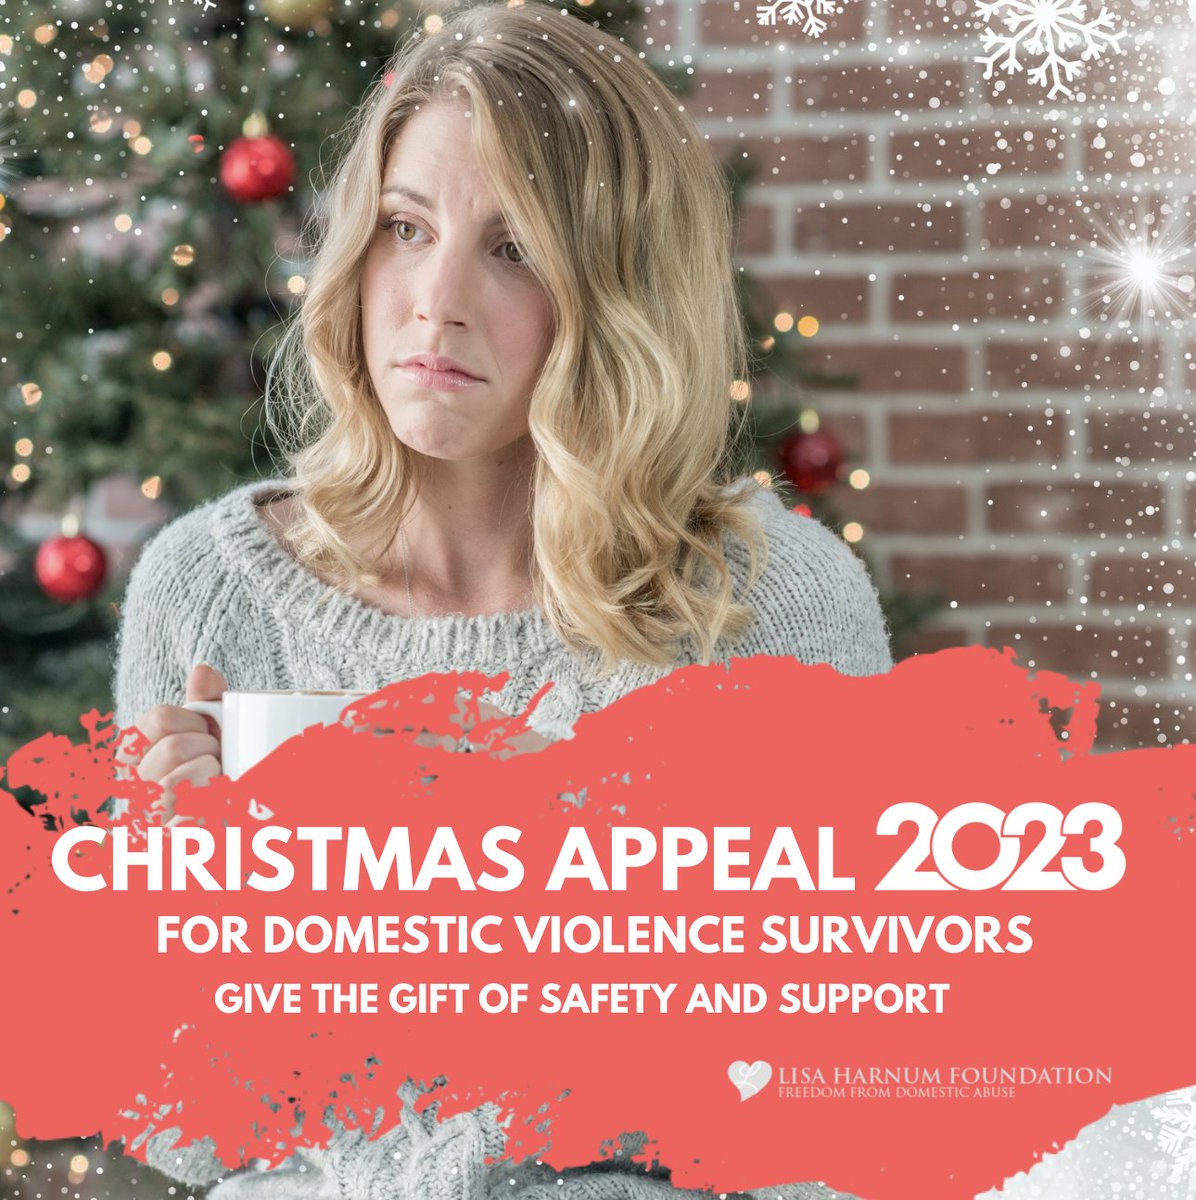 The Lisa Harnum Foundation is a local non-profit organisation dedicated to supporting survivors of domestic violence.

Find out more at galstoncommunity.com.au/support-surviv…
#domesticviolenceawareness #domesticviolenceprevention #ChristmasAppeal #christmasappeal2023 #SupportSurvivors